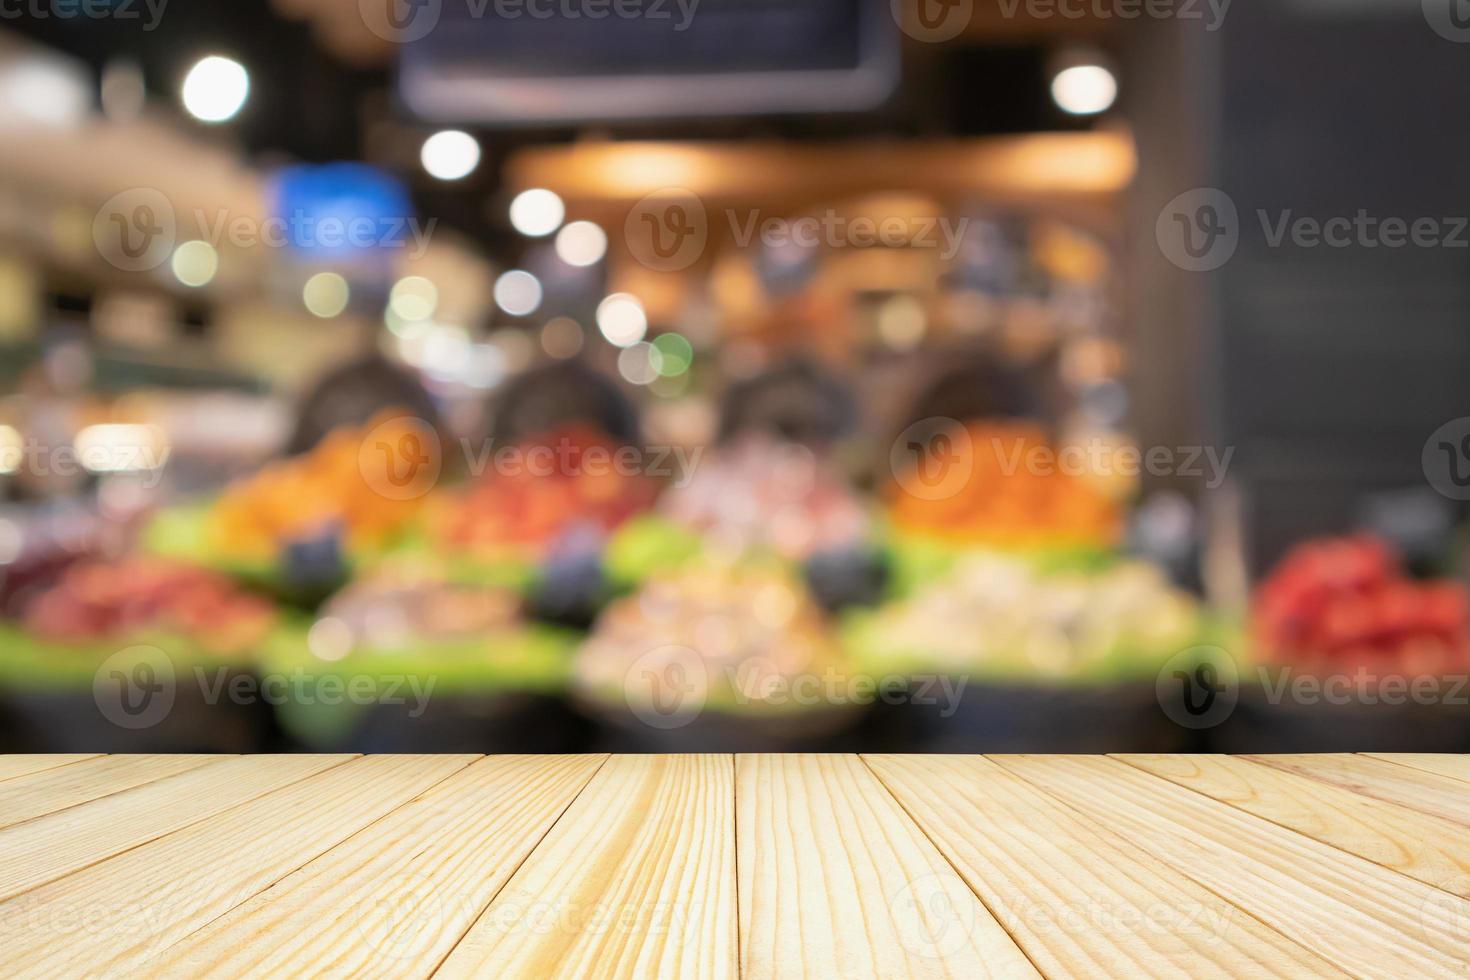 Empty wood table top with abstract blur colorful Fruits in display basket in supermarket grocery store defocused background with bokeh light photo